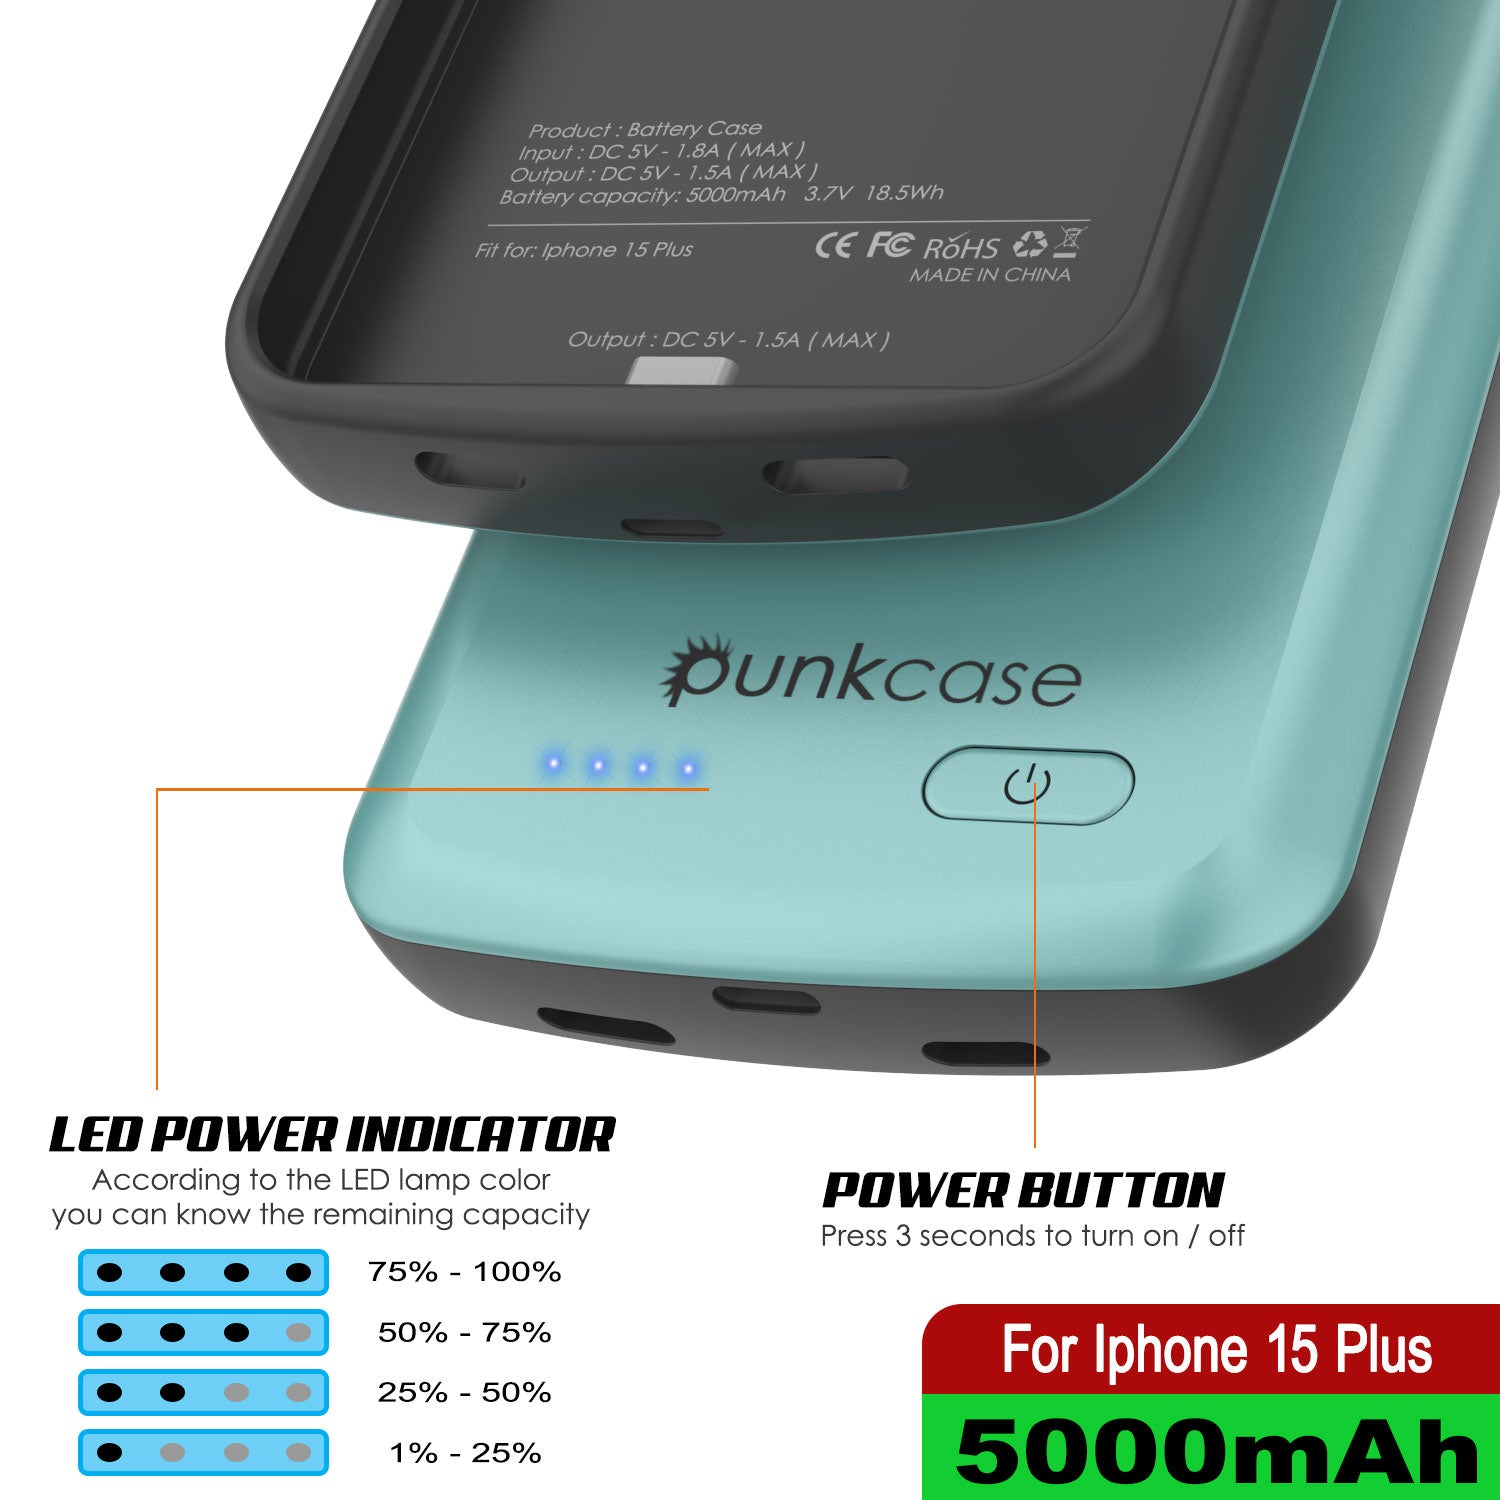 iPhone 15 Plus Battery Case, PunkJuice 5000mAH Fast Charging Power Bank W/ Screen Protector | [Teal]